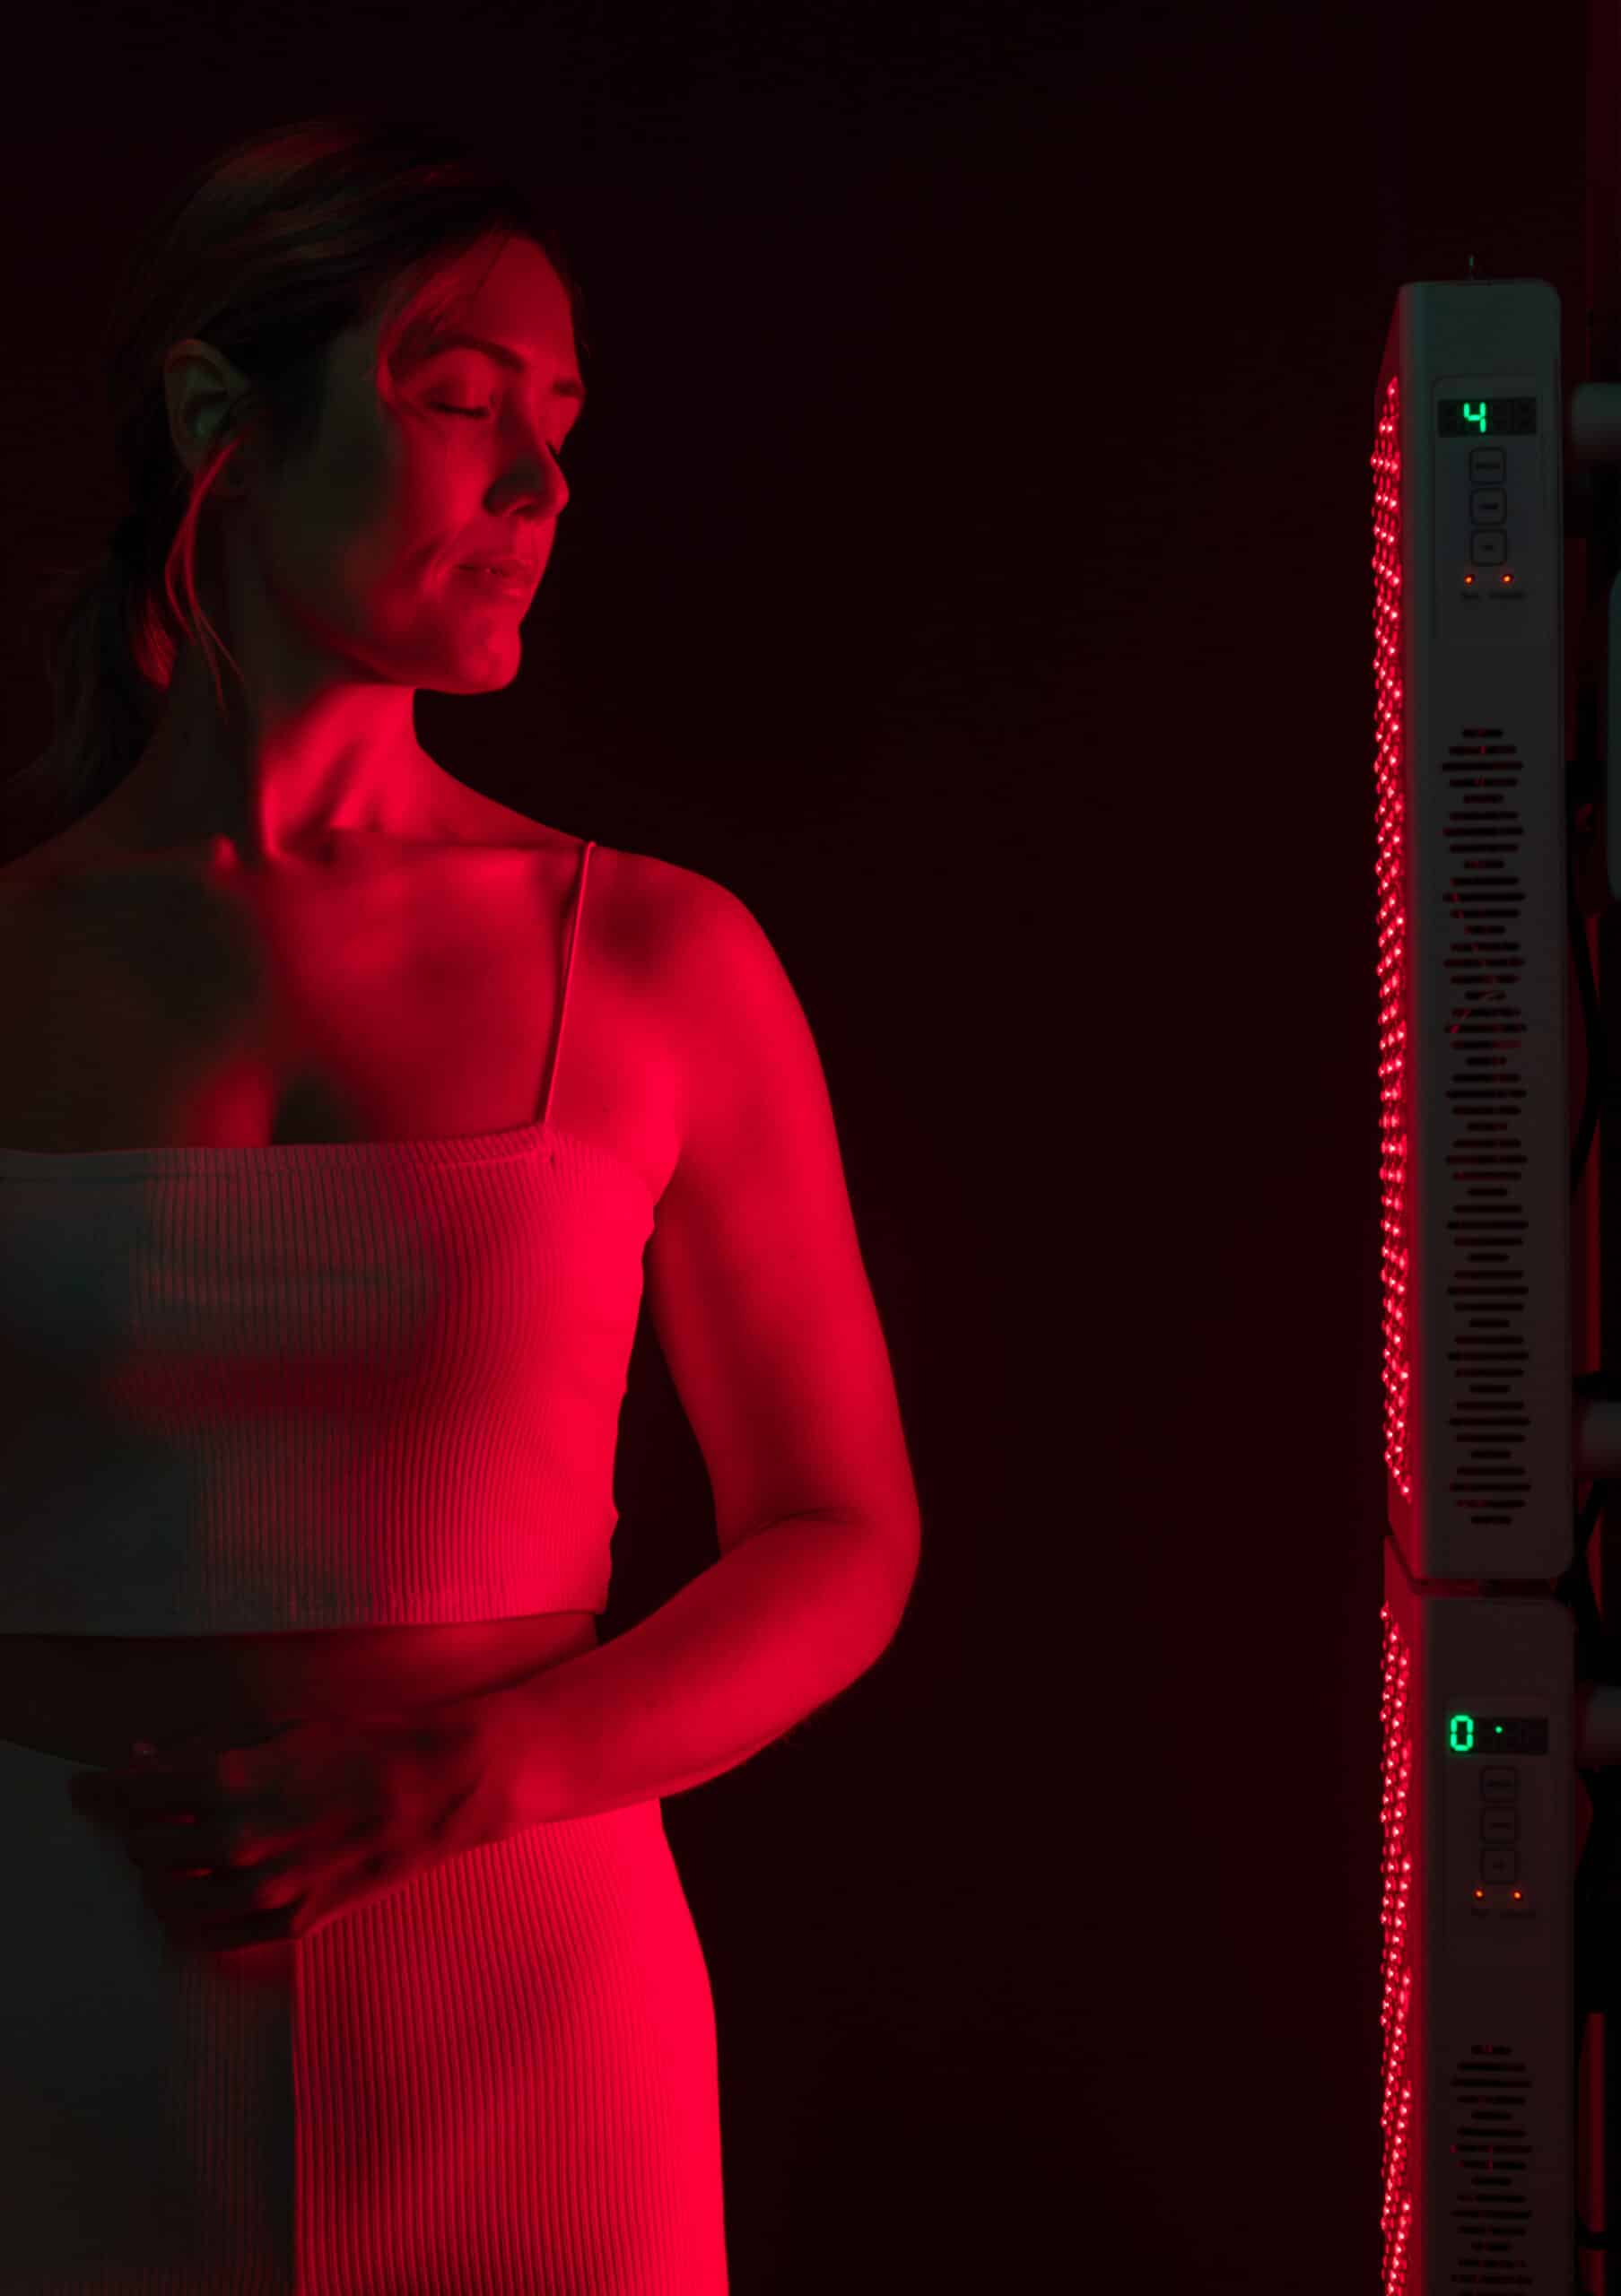 Woman getting red light therapy in a beauty spa. Mature woman standing next to a red light device. Anti-aging and skin care treatment.